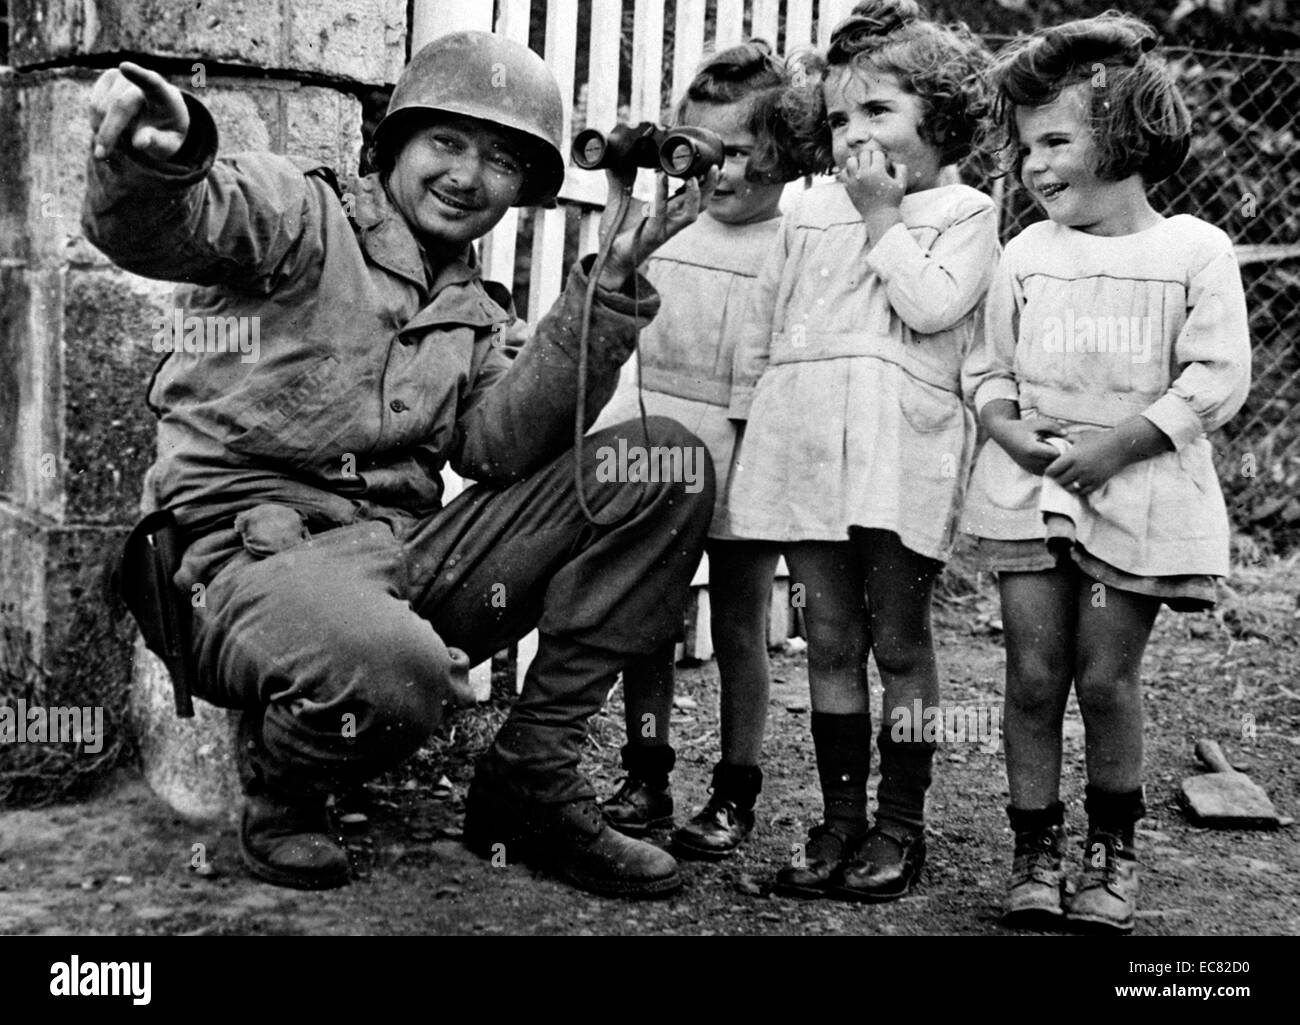 Soldier with binoculars Black and White Stock Photos & Images - Alamy